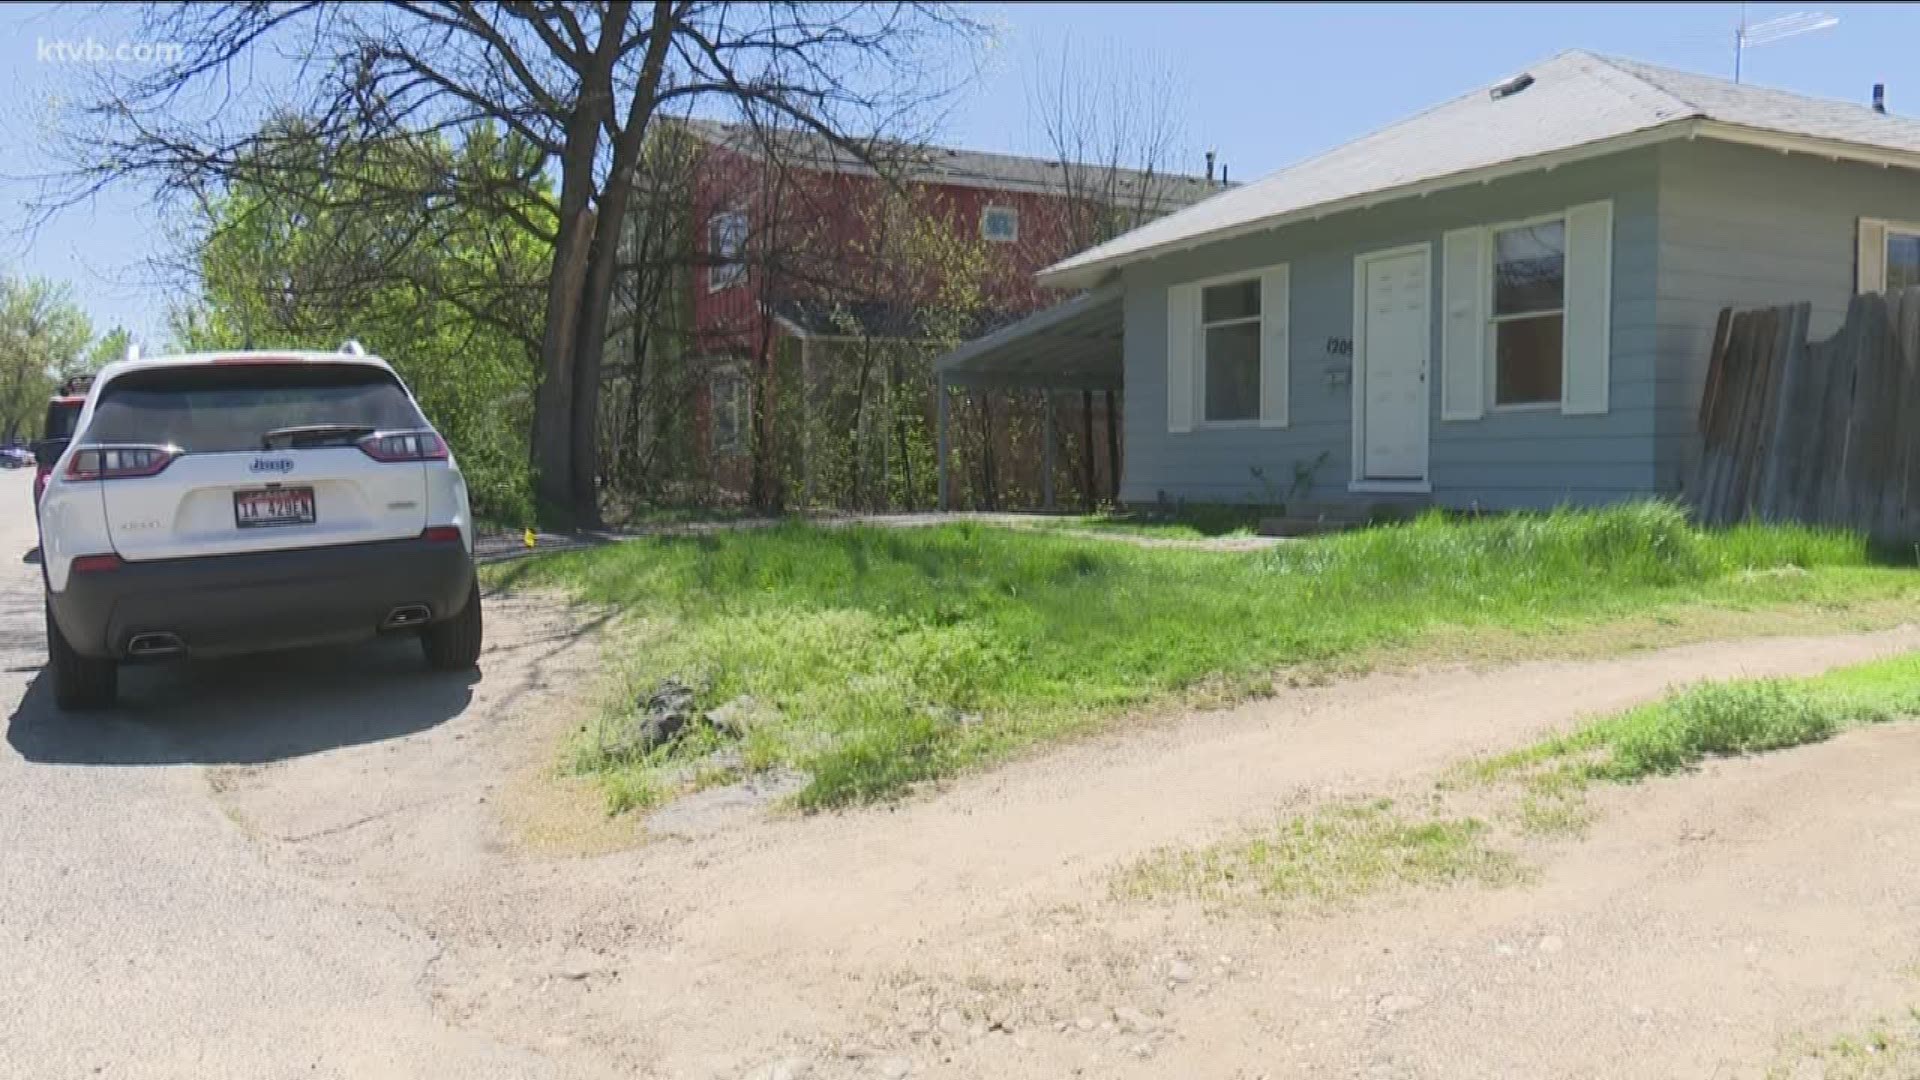 A Boise State student has been told to vacate his rental home in 30 days as he nears graduation.